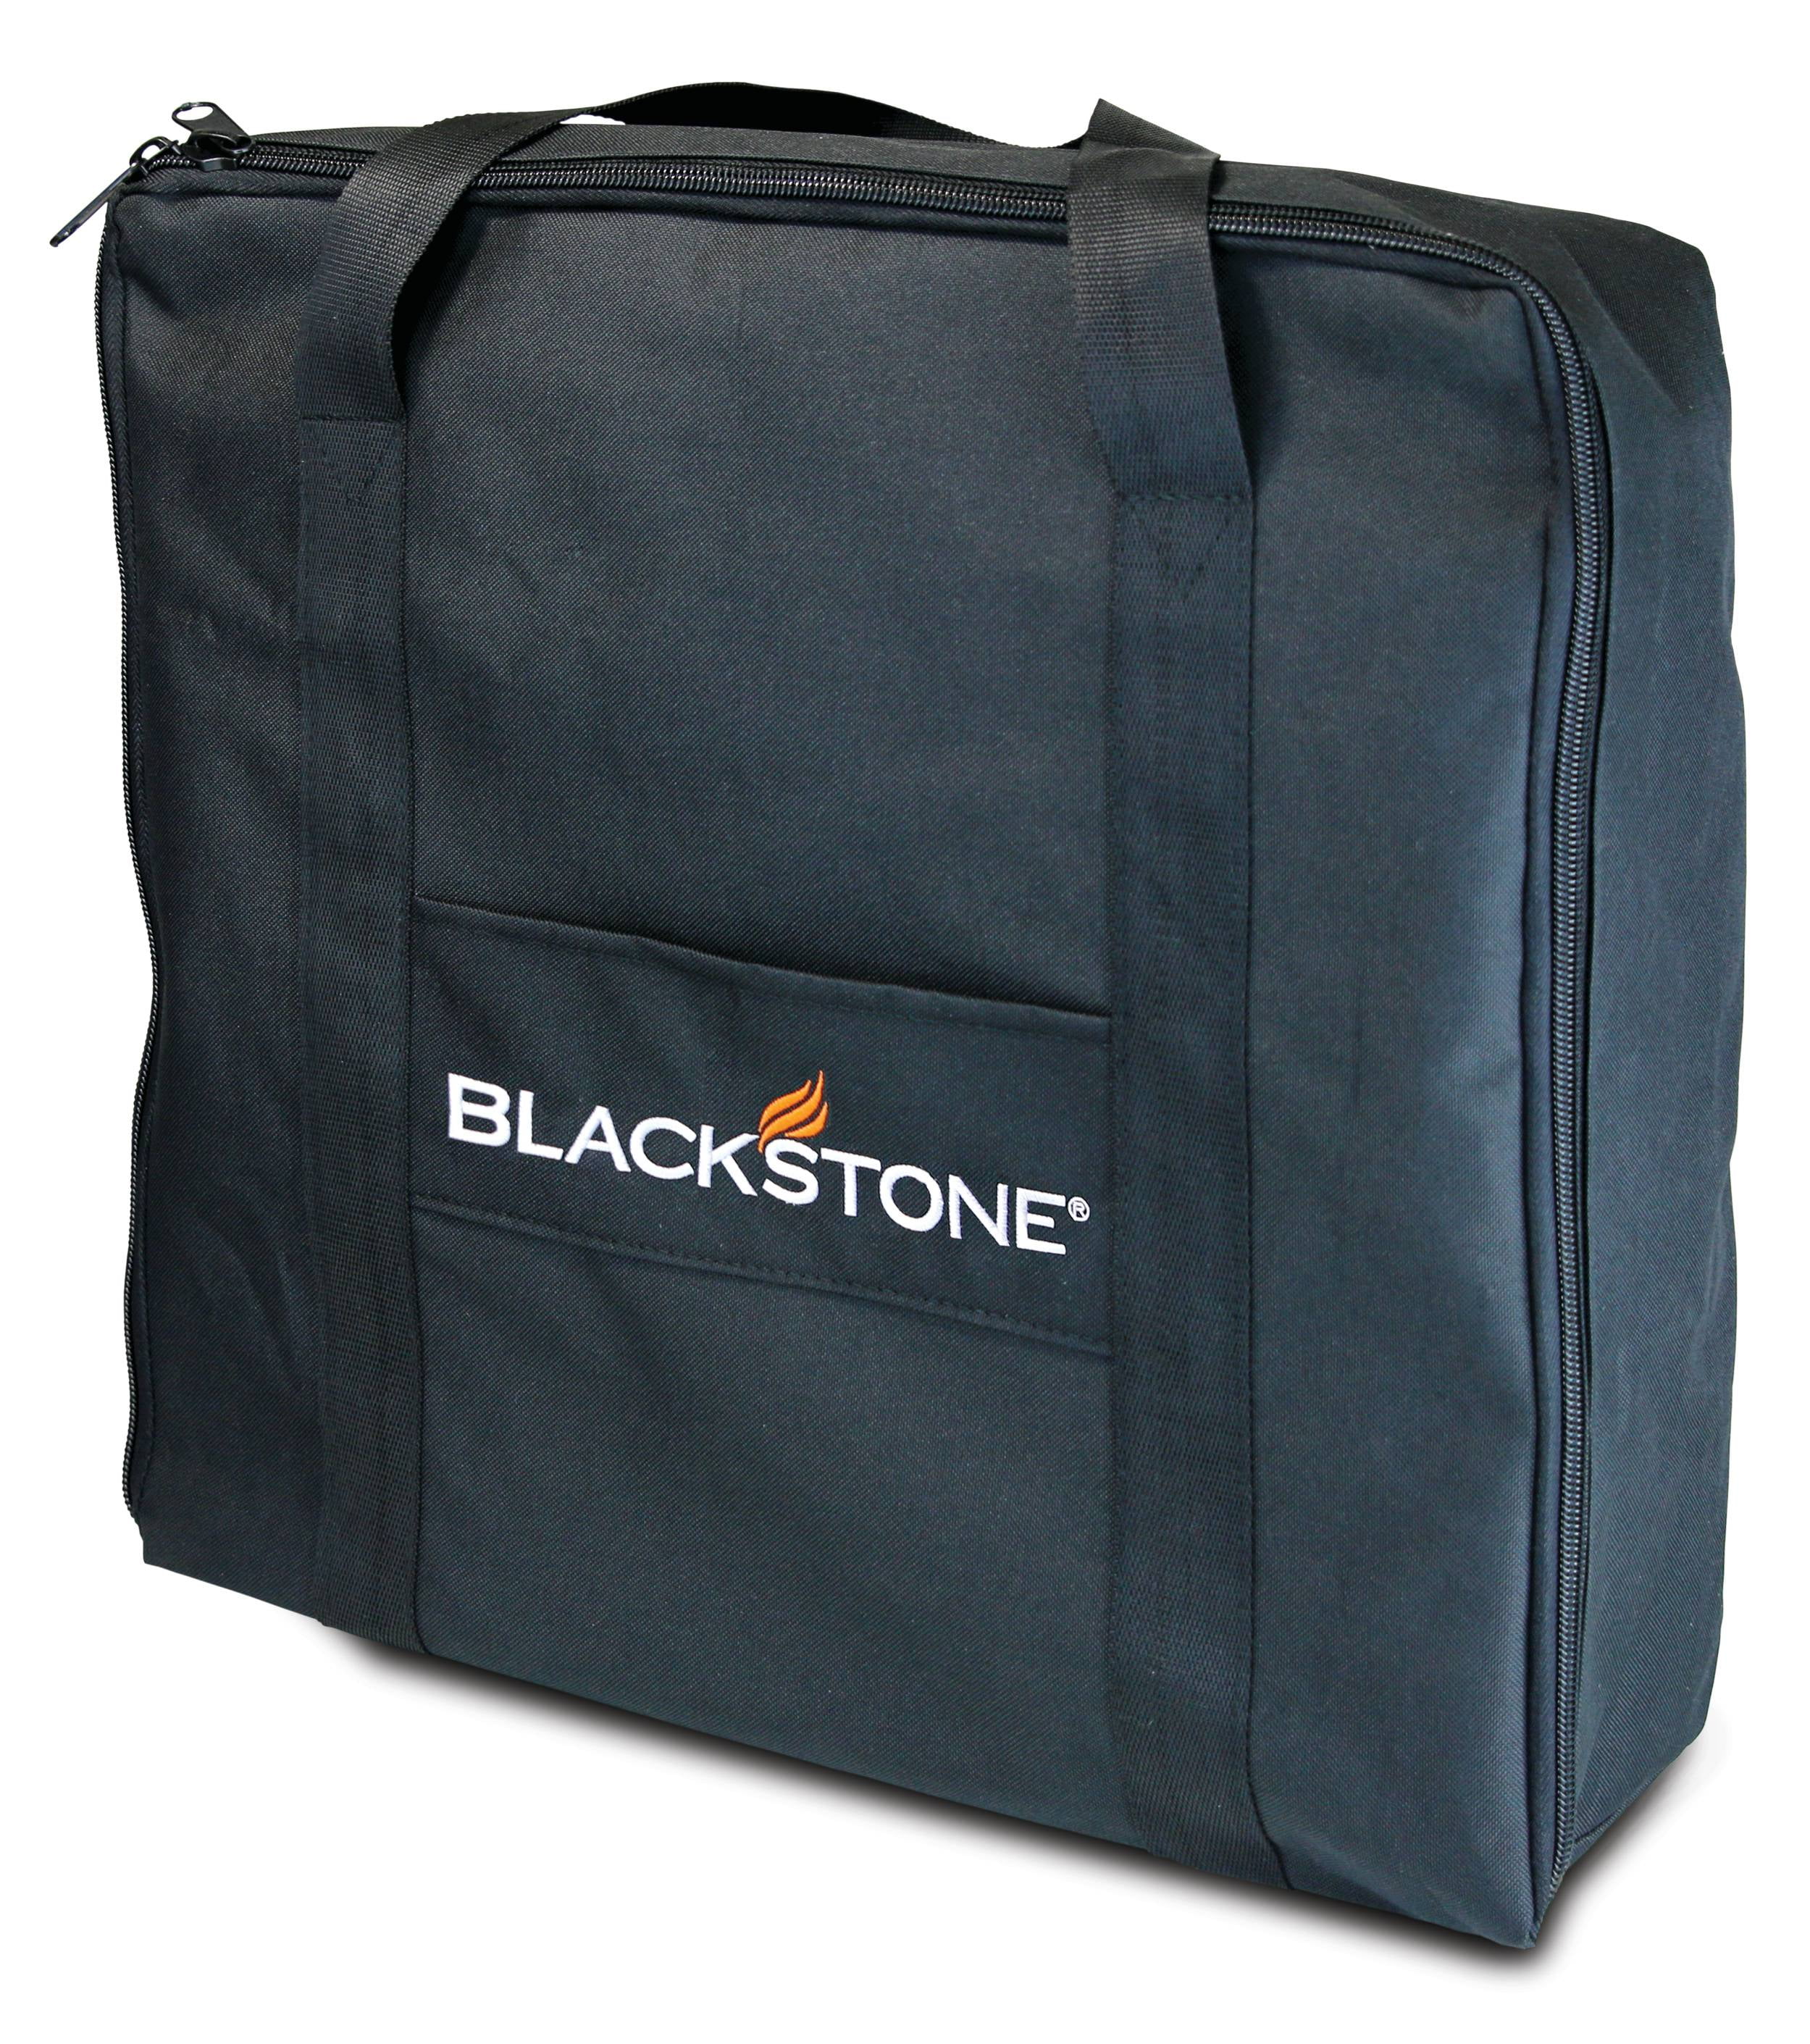 Carry Bag and Cover for Blackstone 17 Inch Table Top Griddle 600d Water 2020 for sale online 